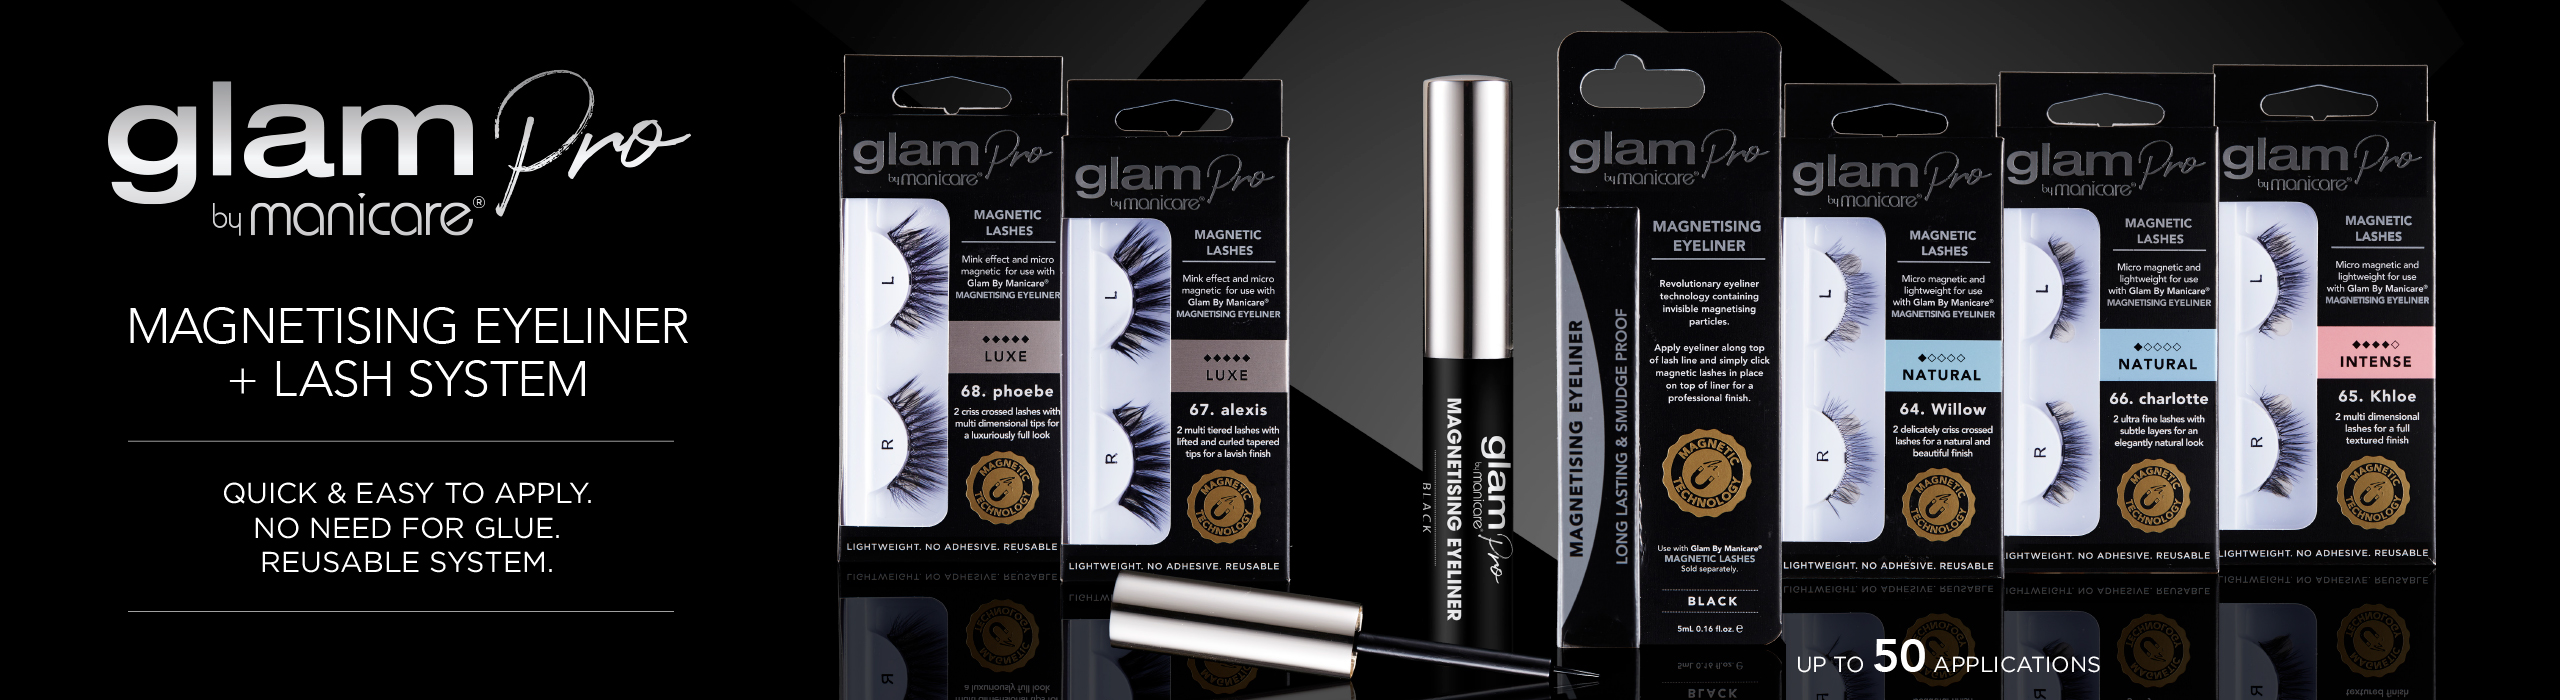 Glam by Manicare® Pro by Manicare Magnetising Eyeliner + Lash System. Change your look in a click with Glam!